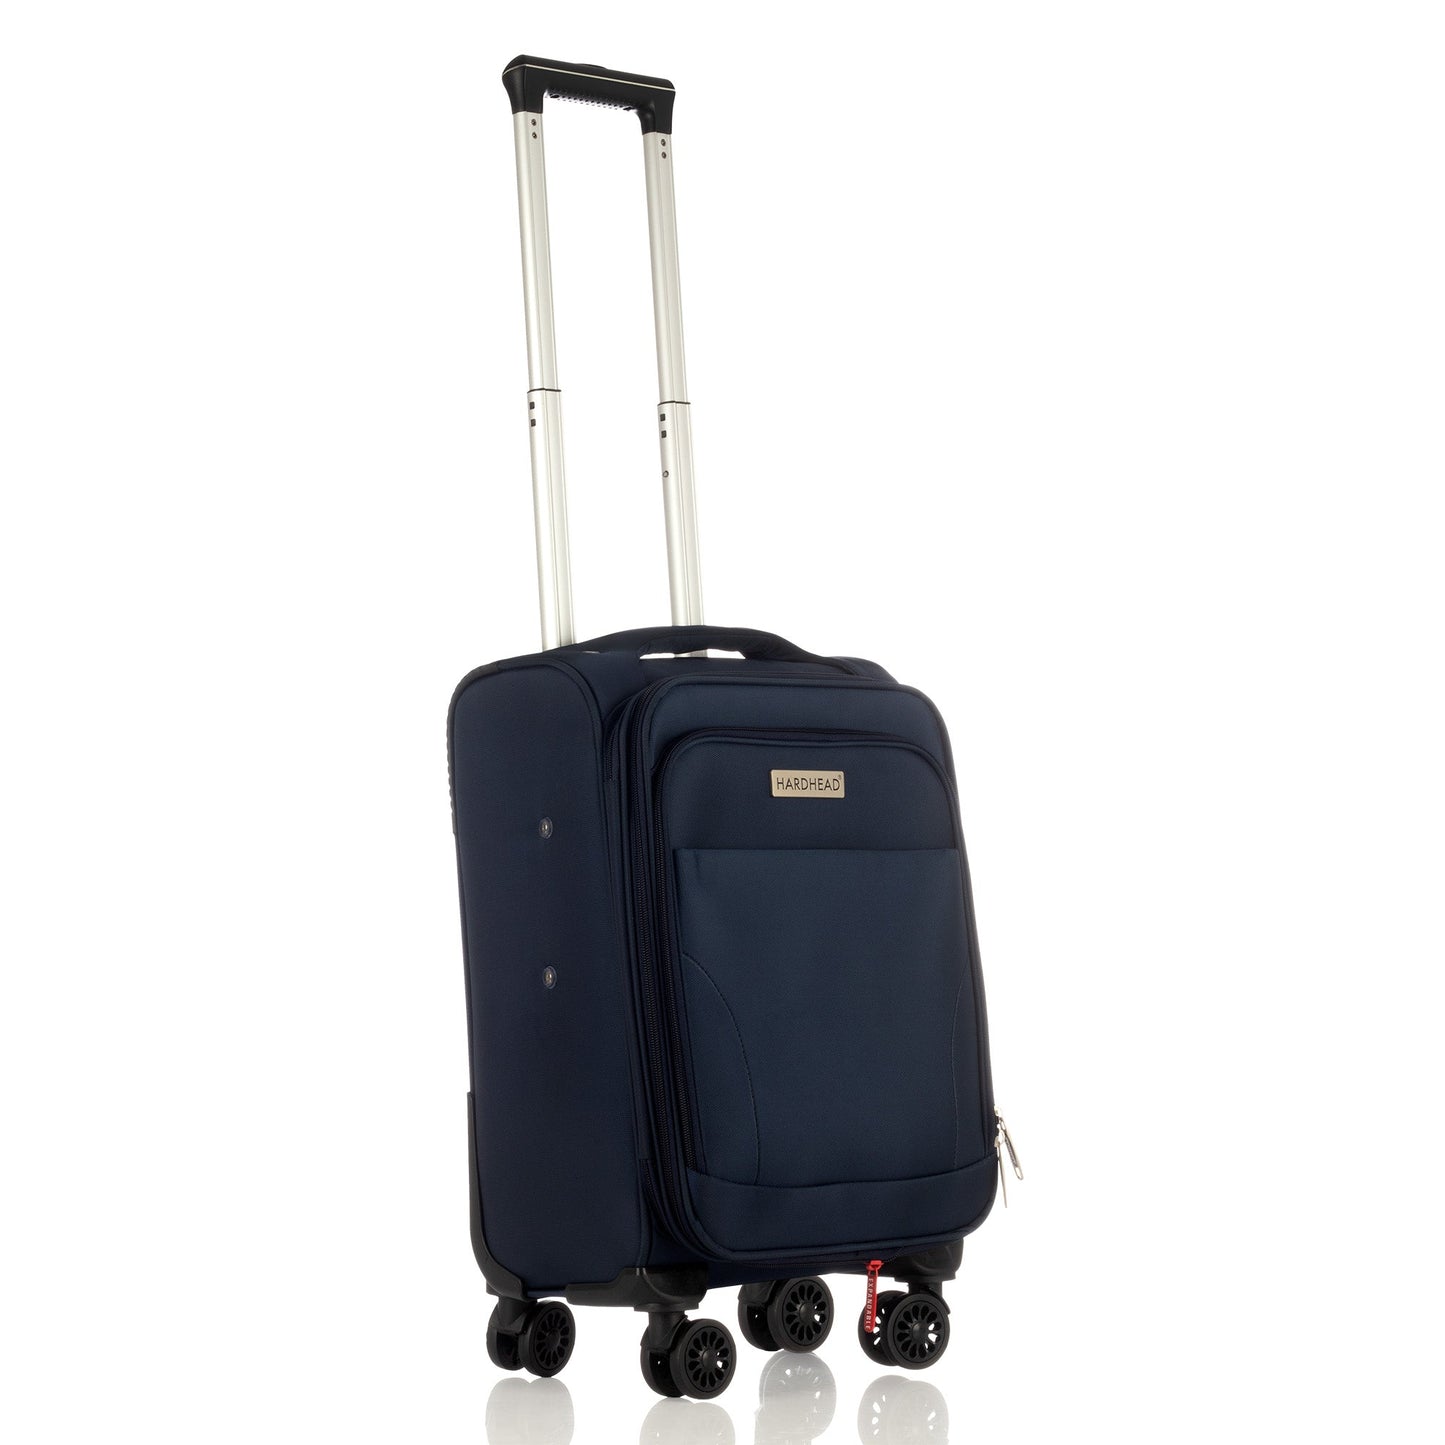 In Heaven Collection Blue Luggage 4 Piece Set (18/20/26/30") Suitcase Lock Spinner Soft